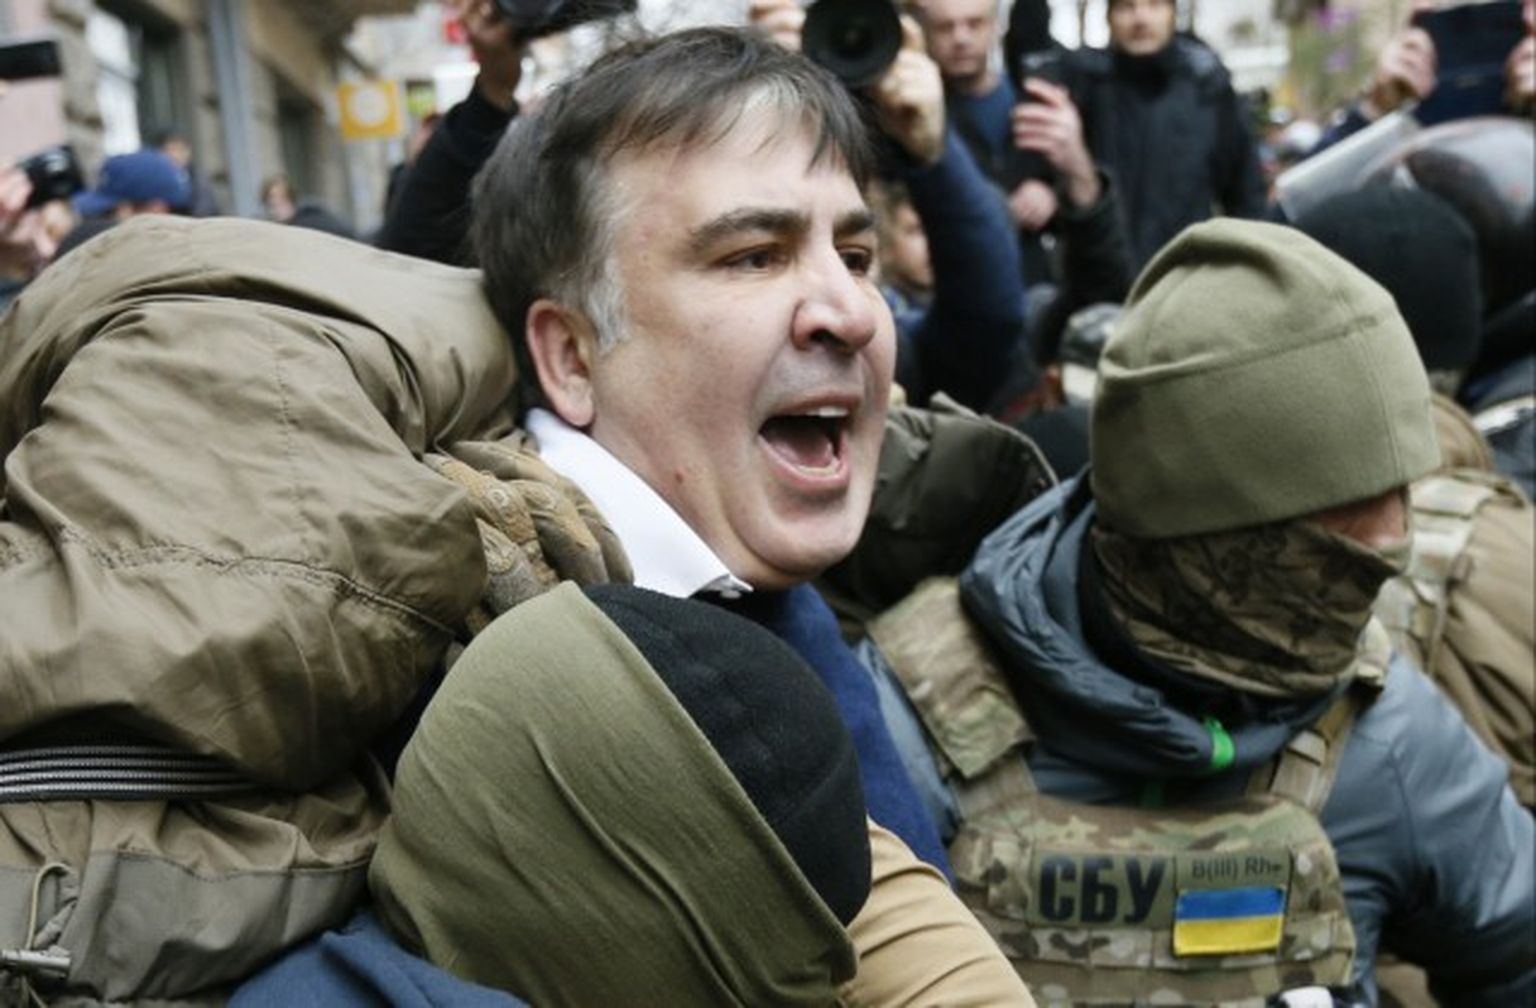 Georgian former President Mikheil Saakashvili is detained by officers of the Security Service of Ukraine, conducting a search of his apartment, in Kiev, Ukraine December 5, 2017. REUTERS/Valentyn Ogirenko